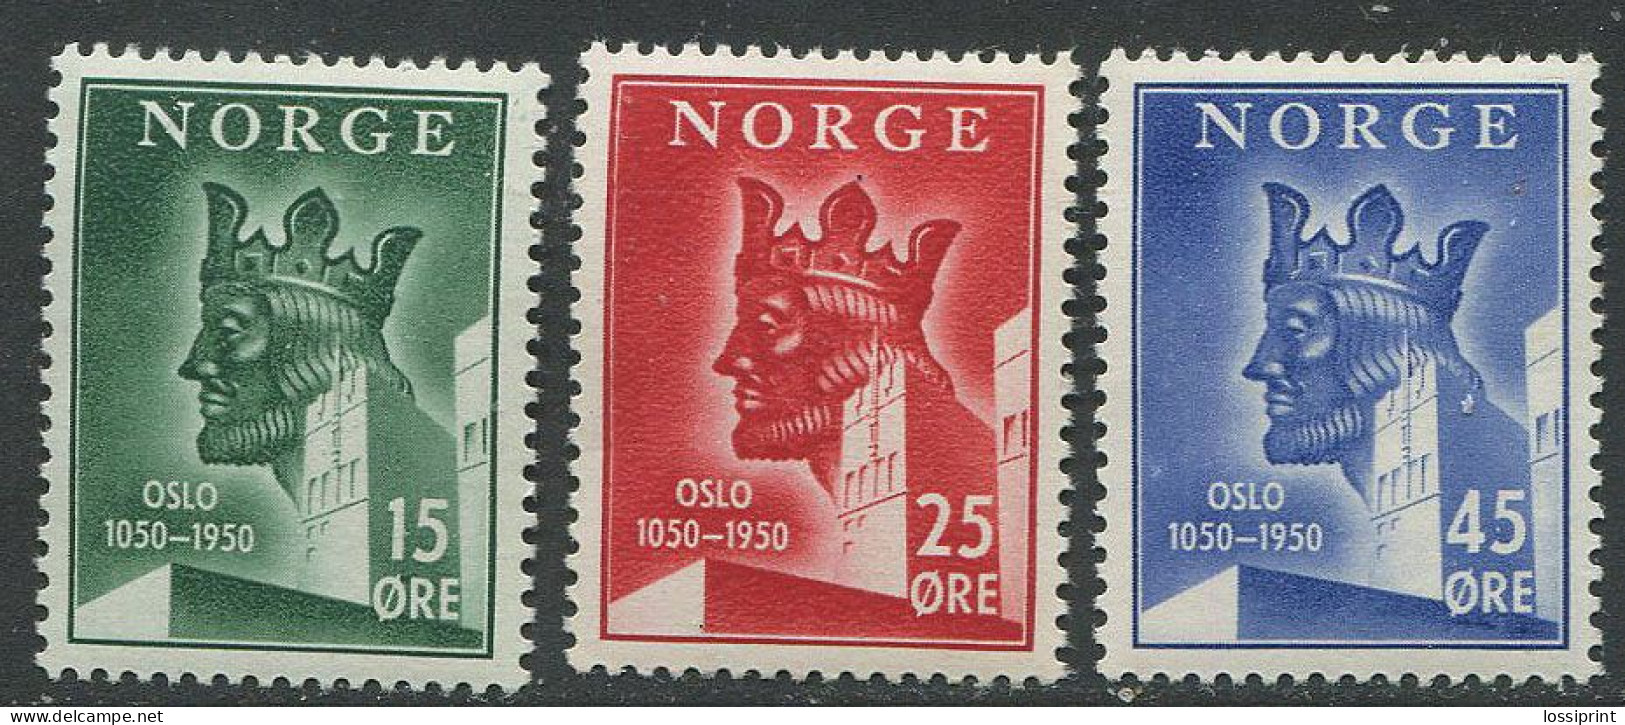 Norway:Unused Stamps Serie Oslo 1050-1950, MNH - Neufs